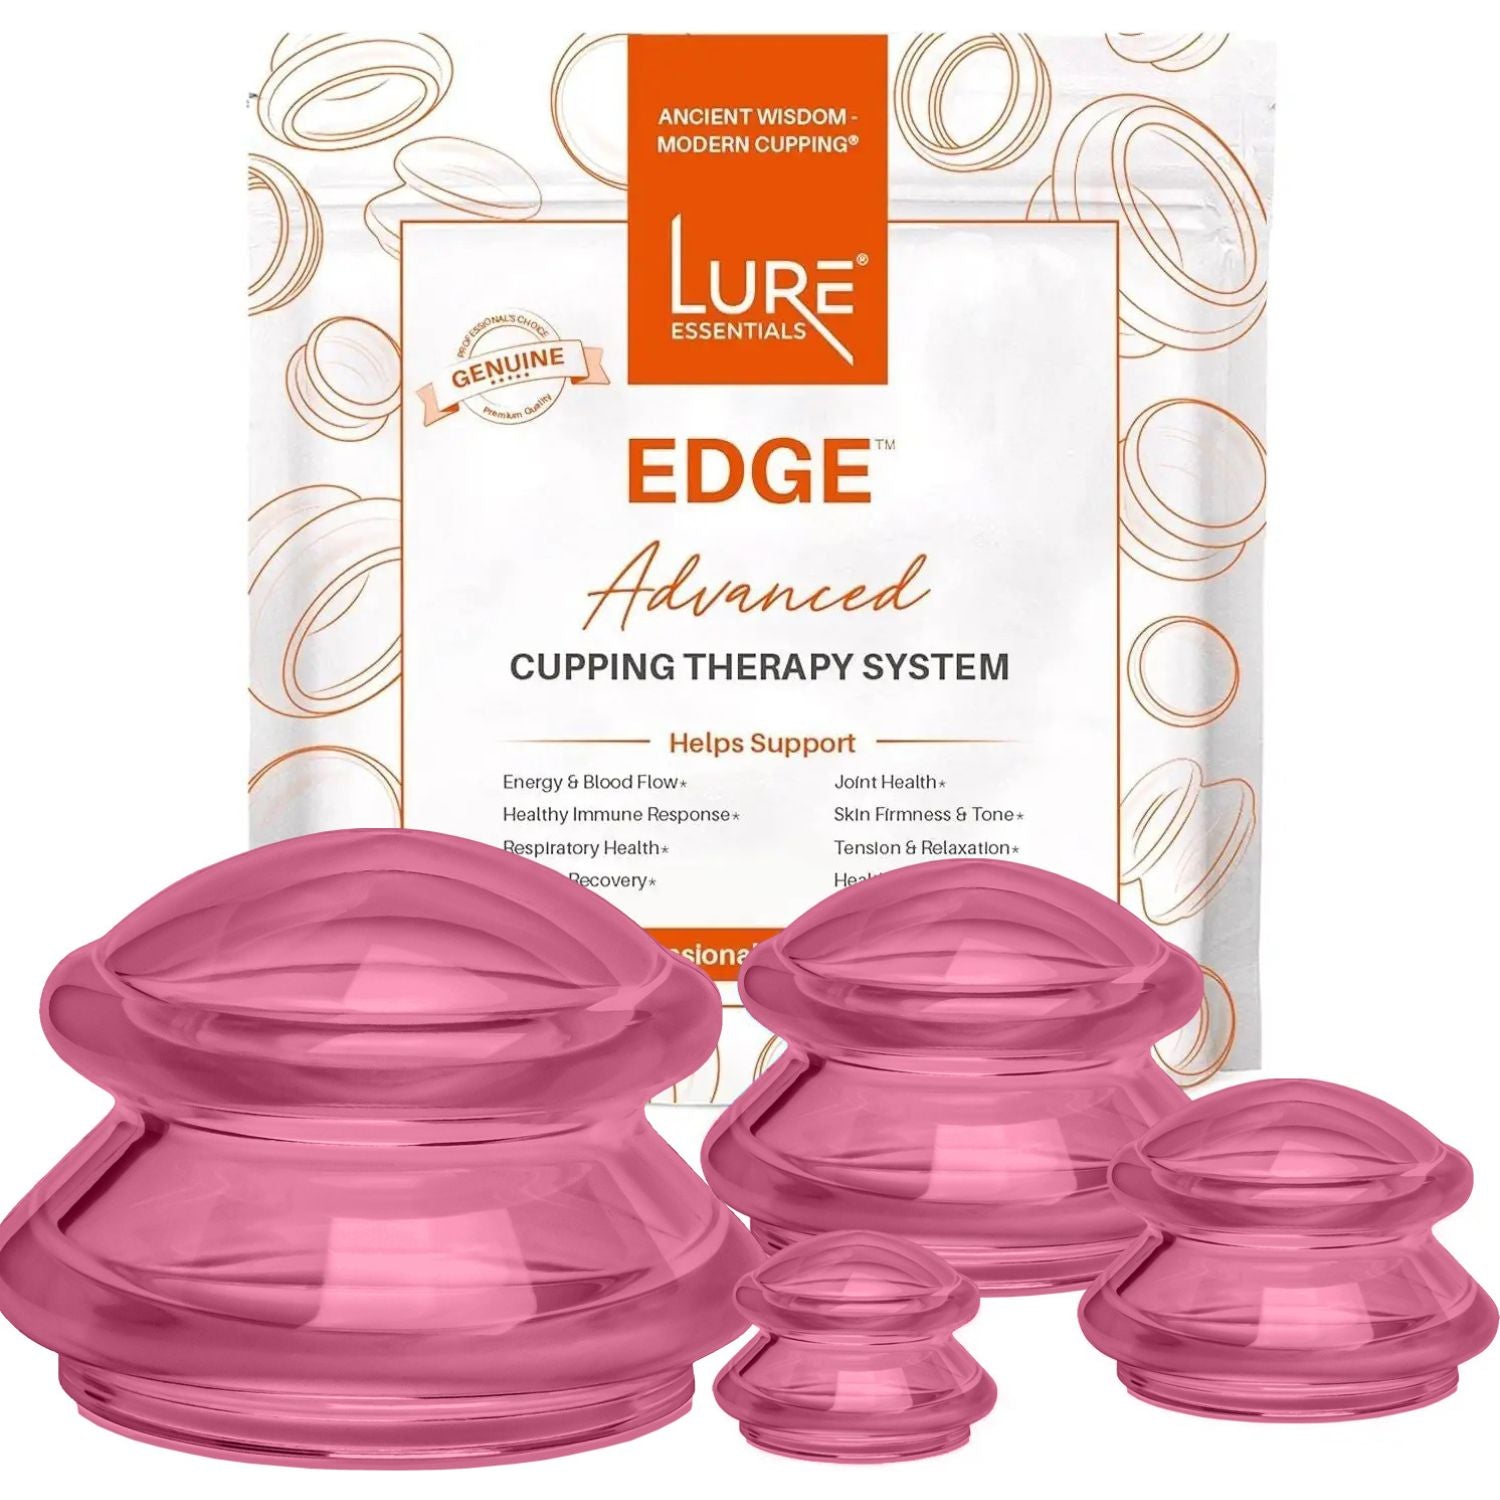 EDGE Cupping Therapy Set - Lure Essentials